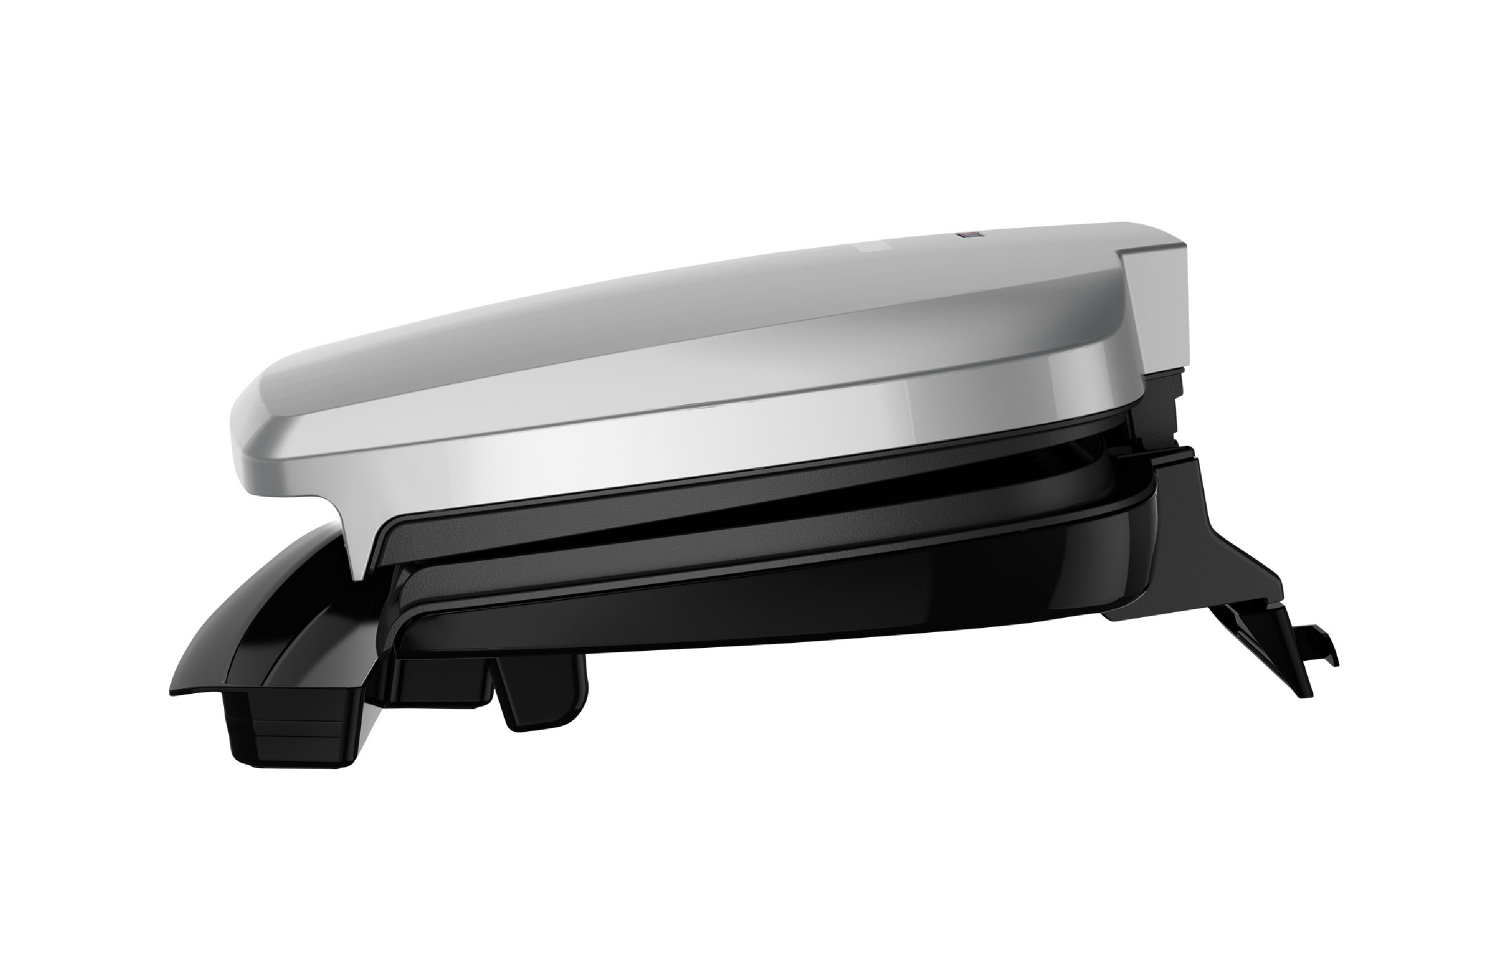 walmart deals on george foreman electric grills and griddles 9 serving classic plate grill panini press 2